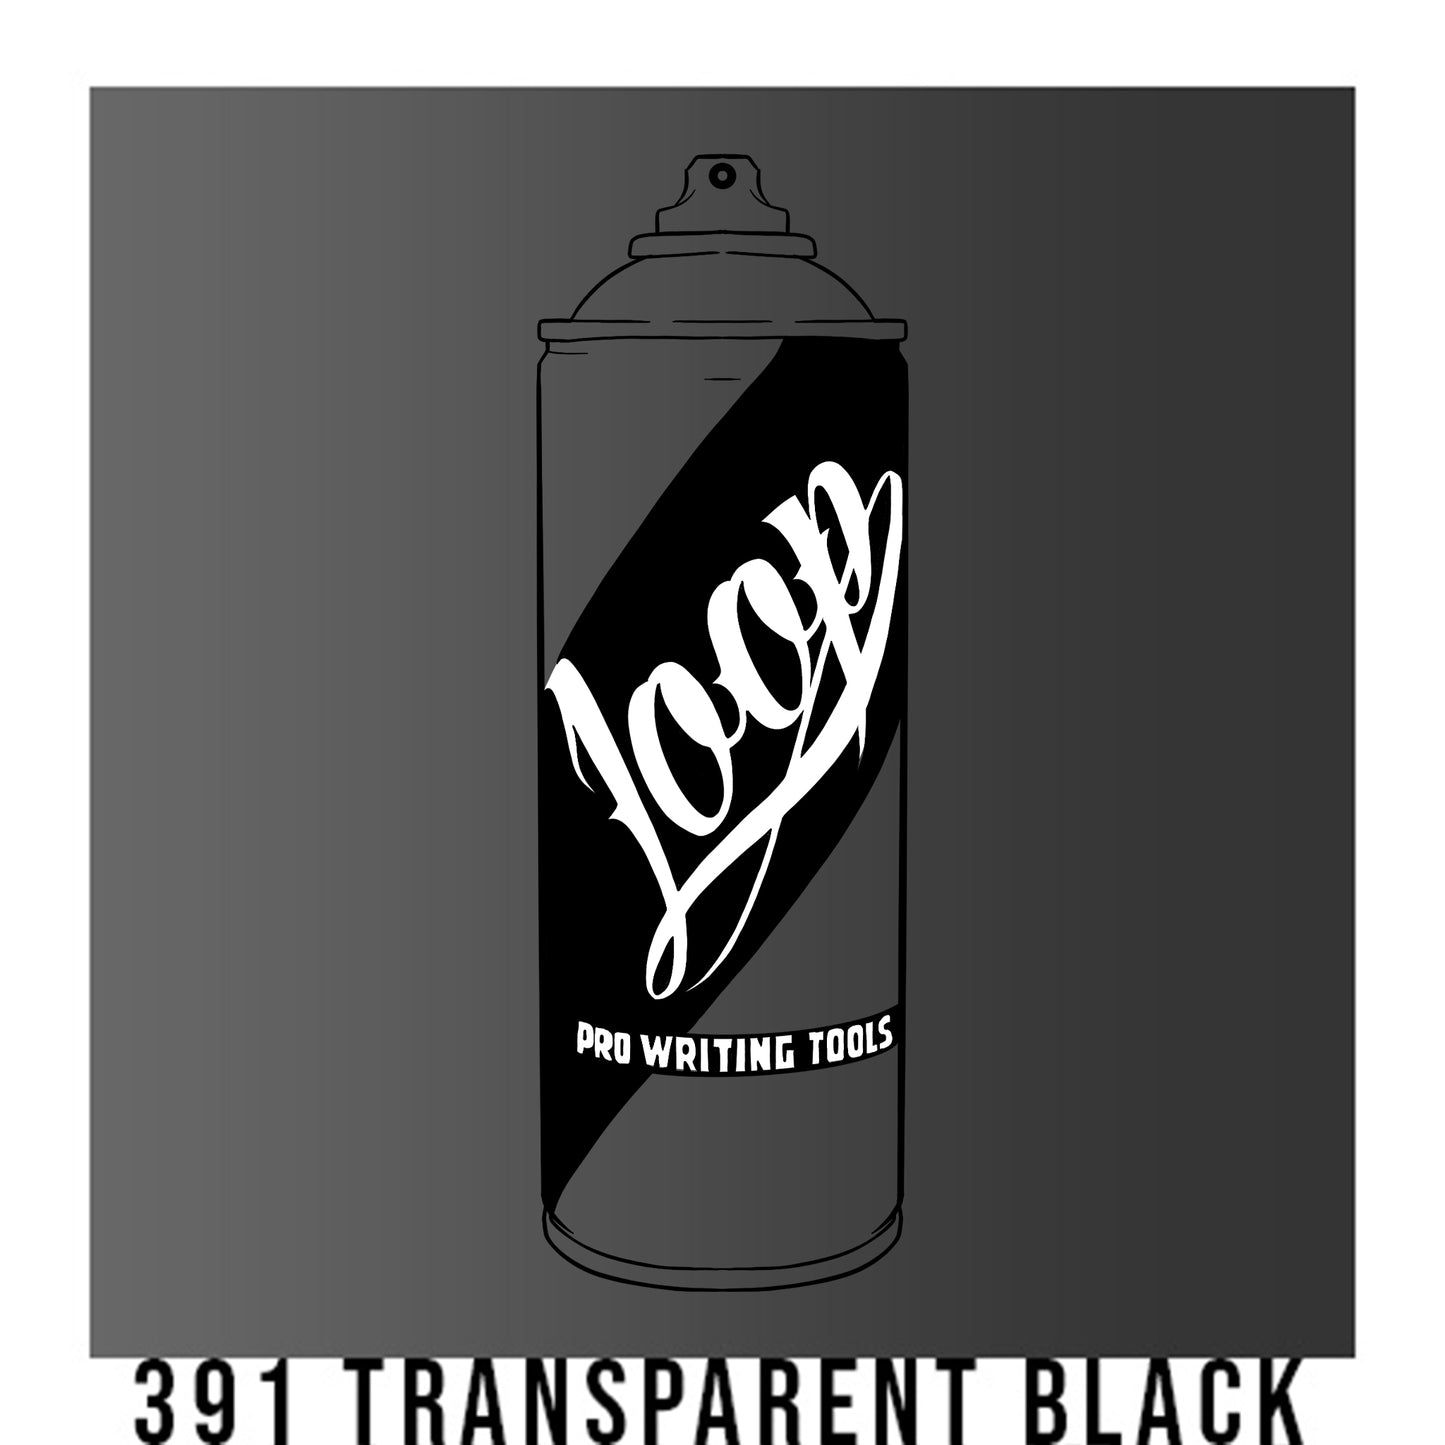 A black outline drawing of a grey to black gradient spray paint can with the word "Loop" written on the face in script. The background is a color swatch of the same grey to black gradient with a white border with the words "391 Transparent black" at the bottom.